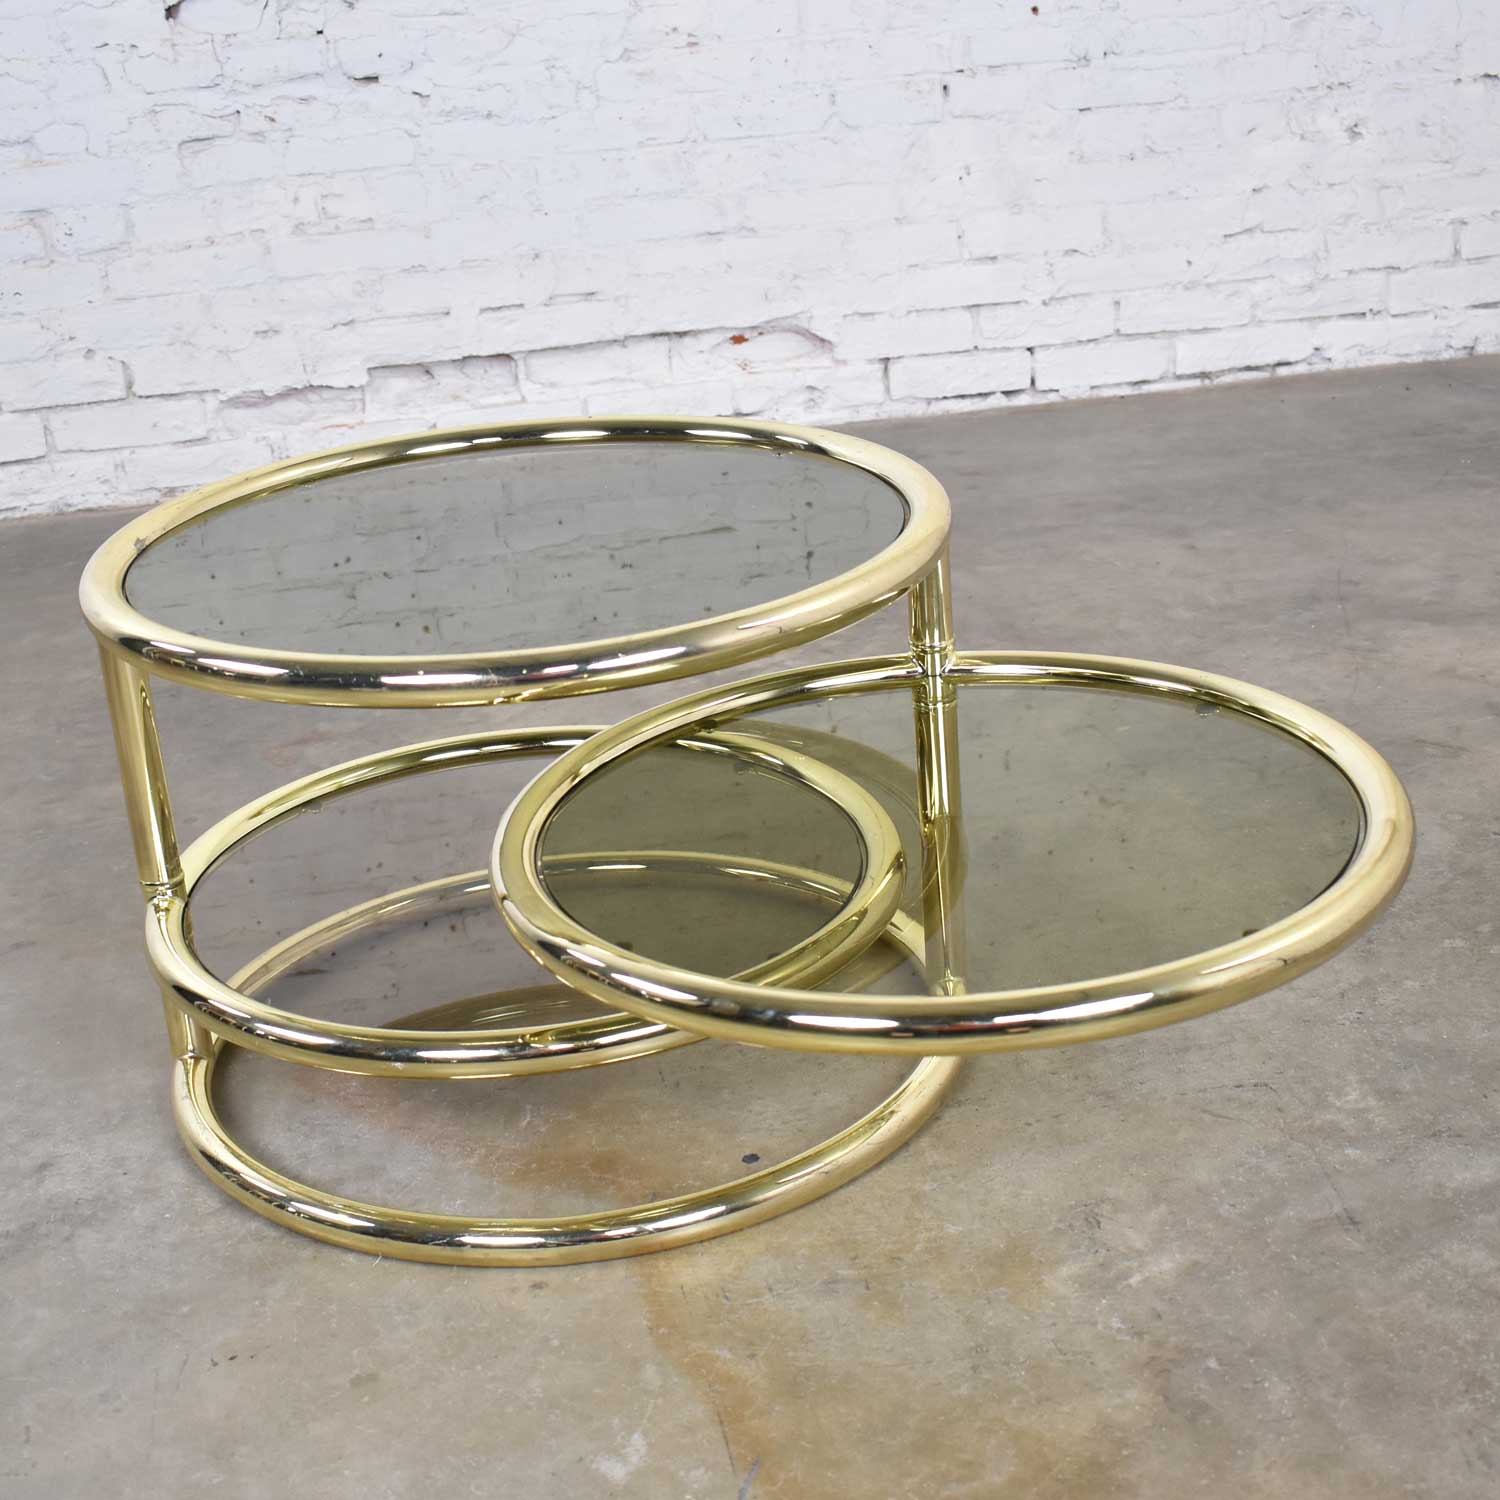 Modern Round Brass & Smoke Glass End Table or Coffee Table w/Pivoting Tiers Style of DIA Furniture 1970